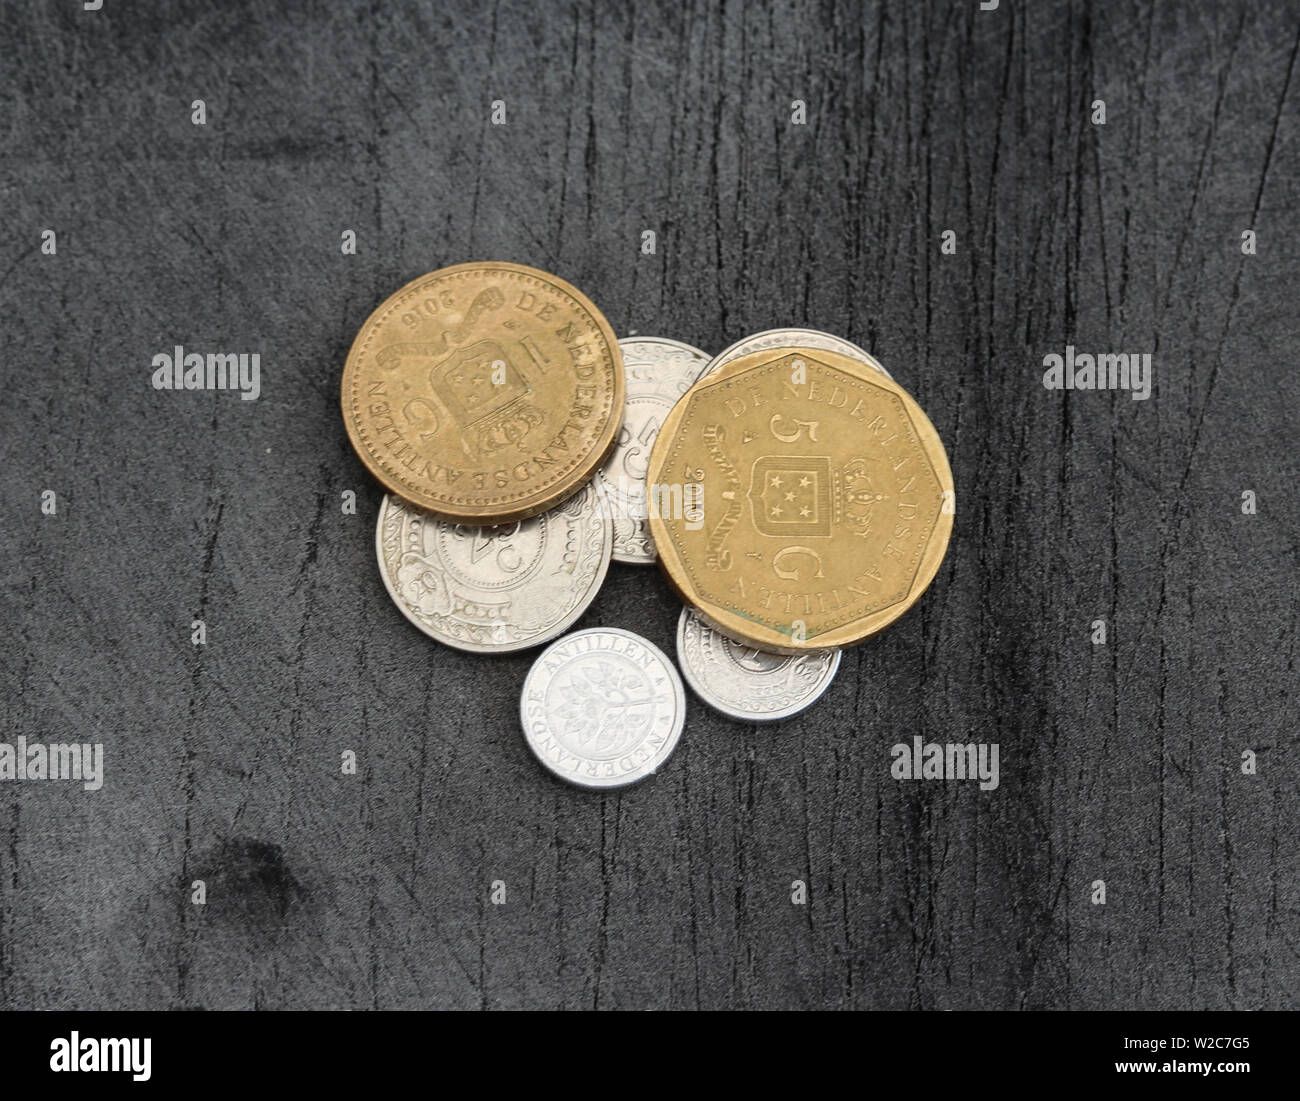 Close up of Stable of Netherlands Antillean guilder coins on black background Stock Photo